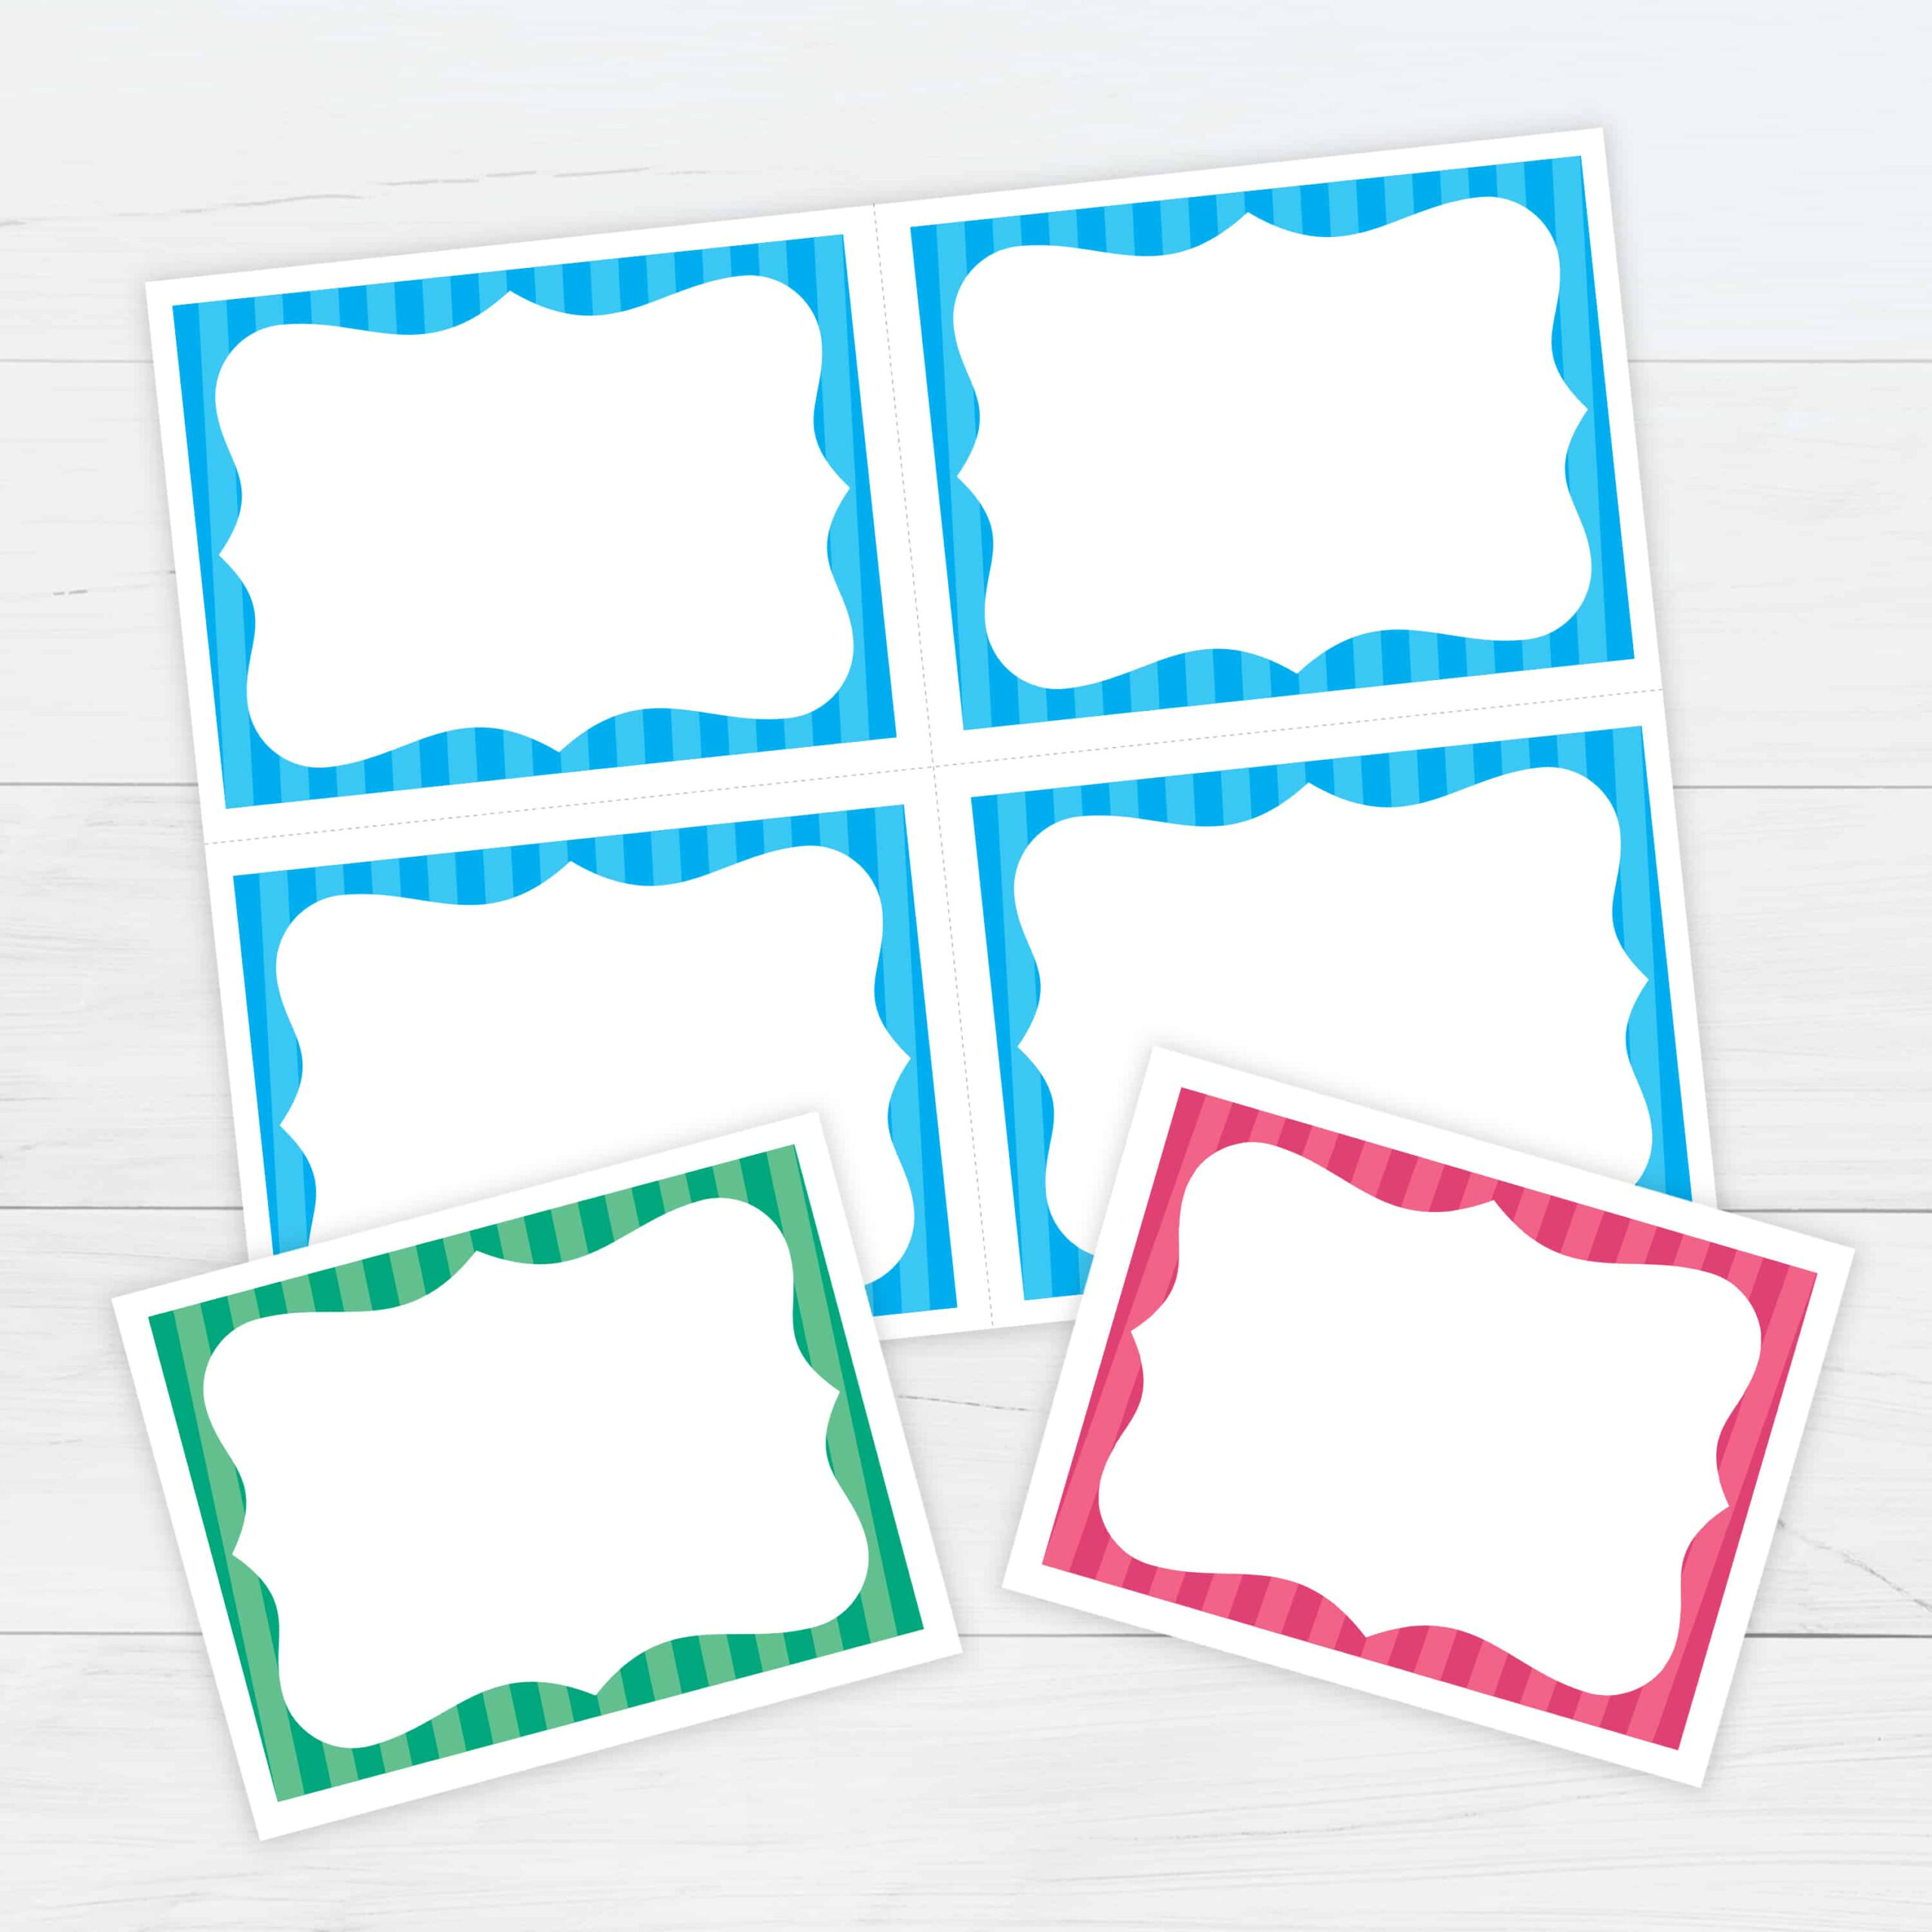 Bordered Flash Cards Template 10 – Free Printable Download In Free Printable Blank Flash Cards Template